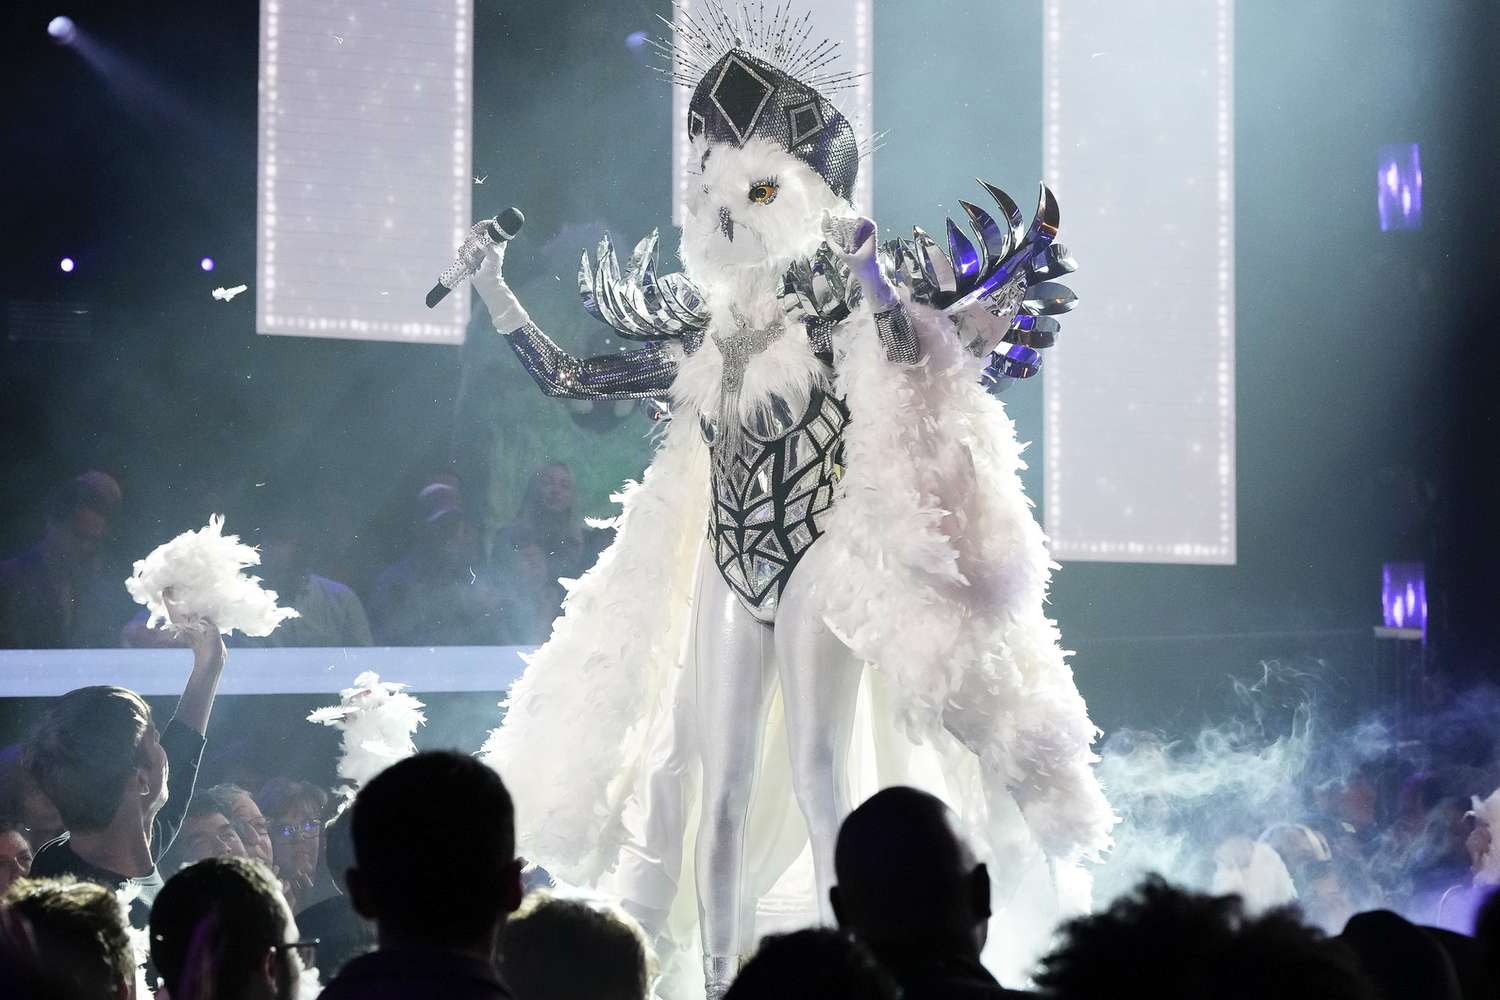 THE MASKED SINGER: Night Owl in the “ABBA Night” episode of THE MASKED SINGER airing Wednesday, Feb. 22